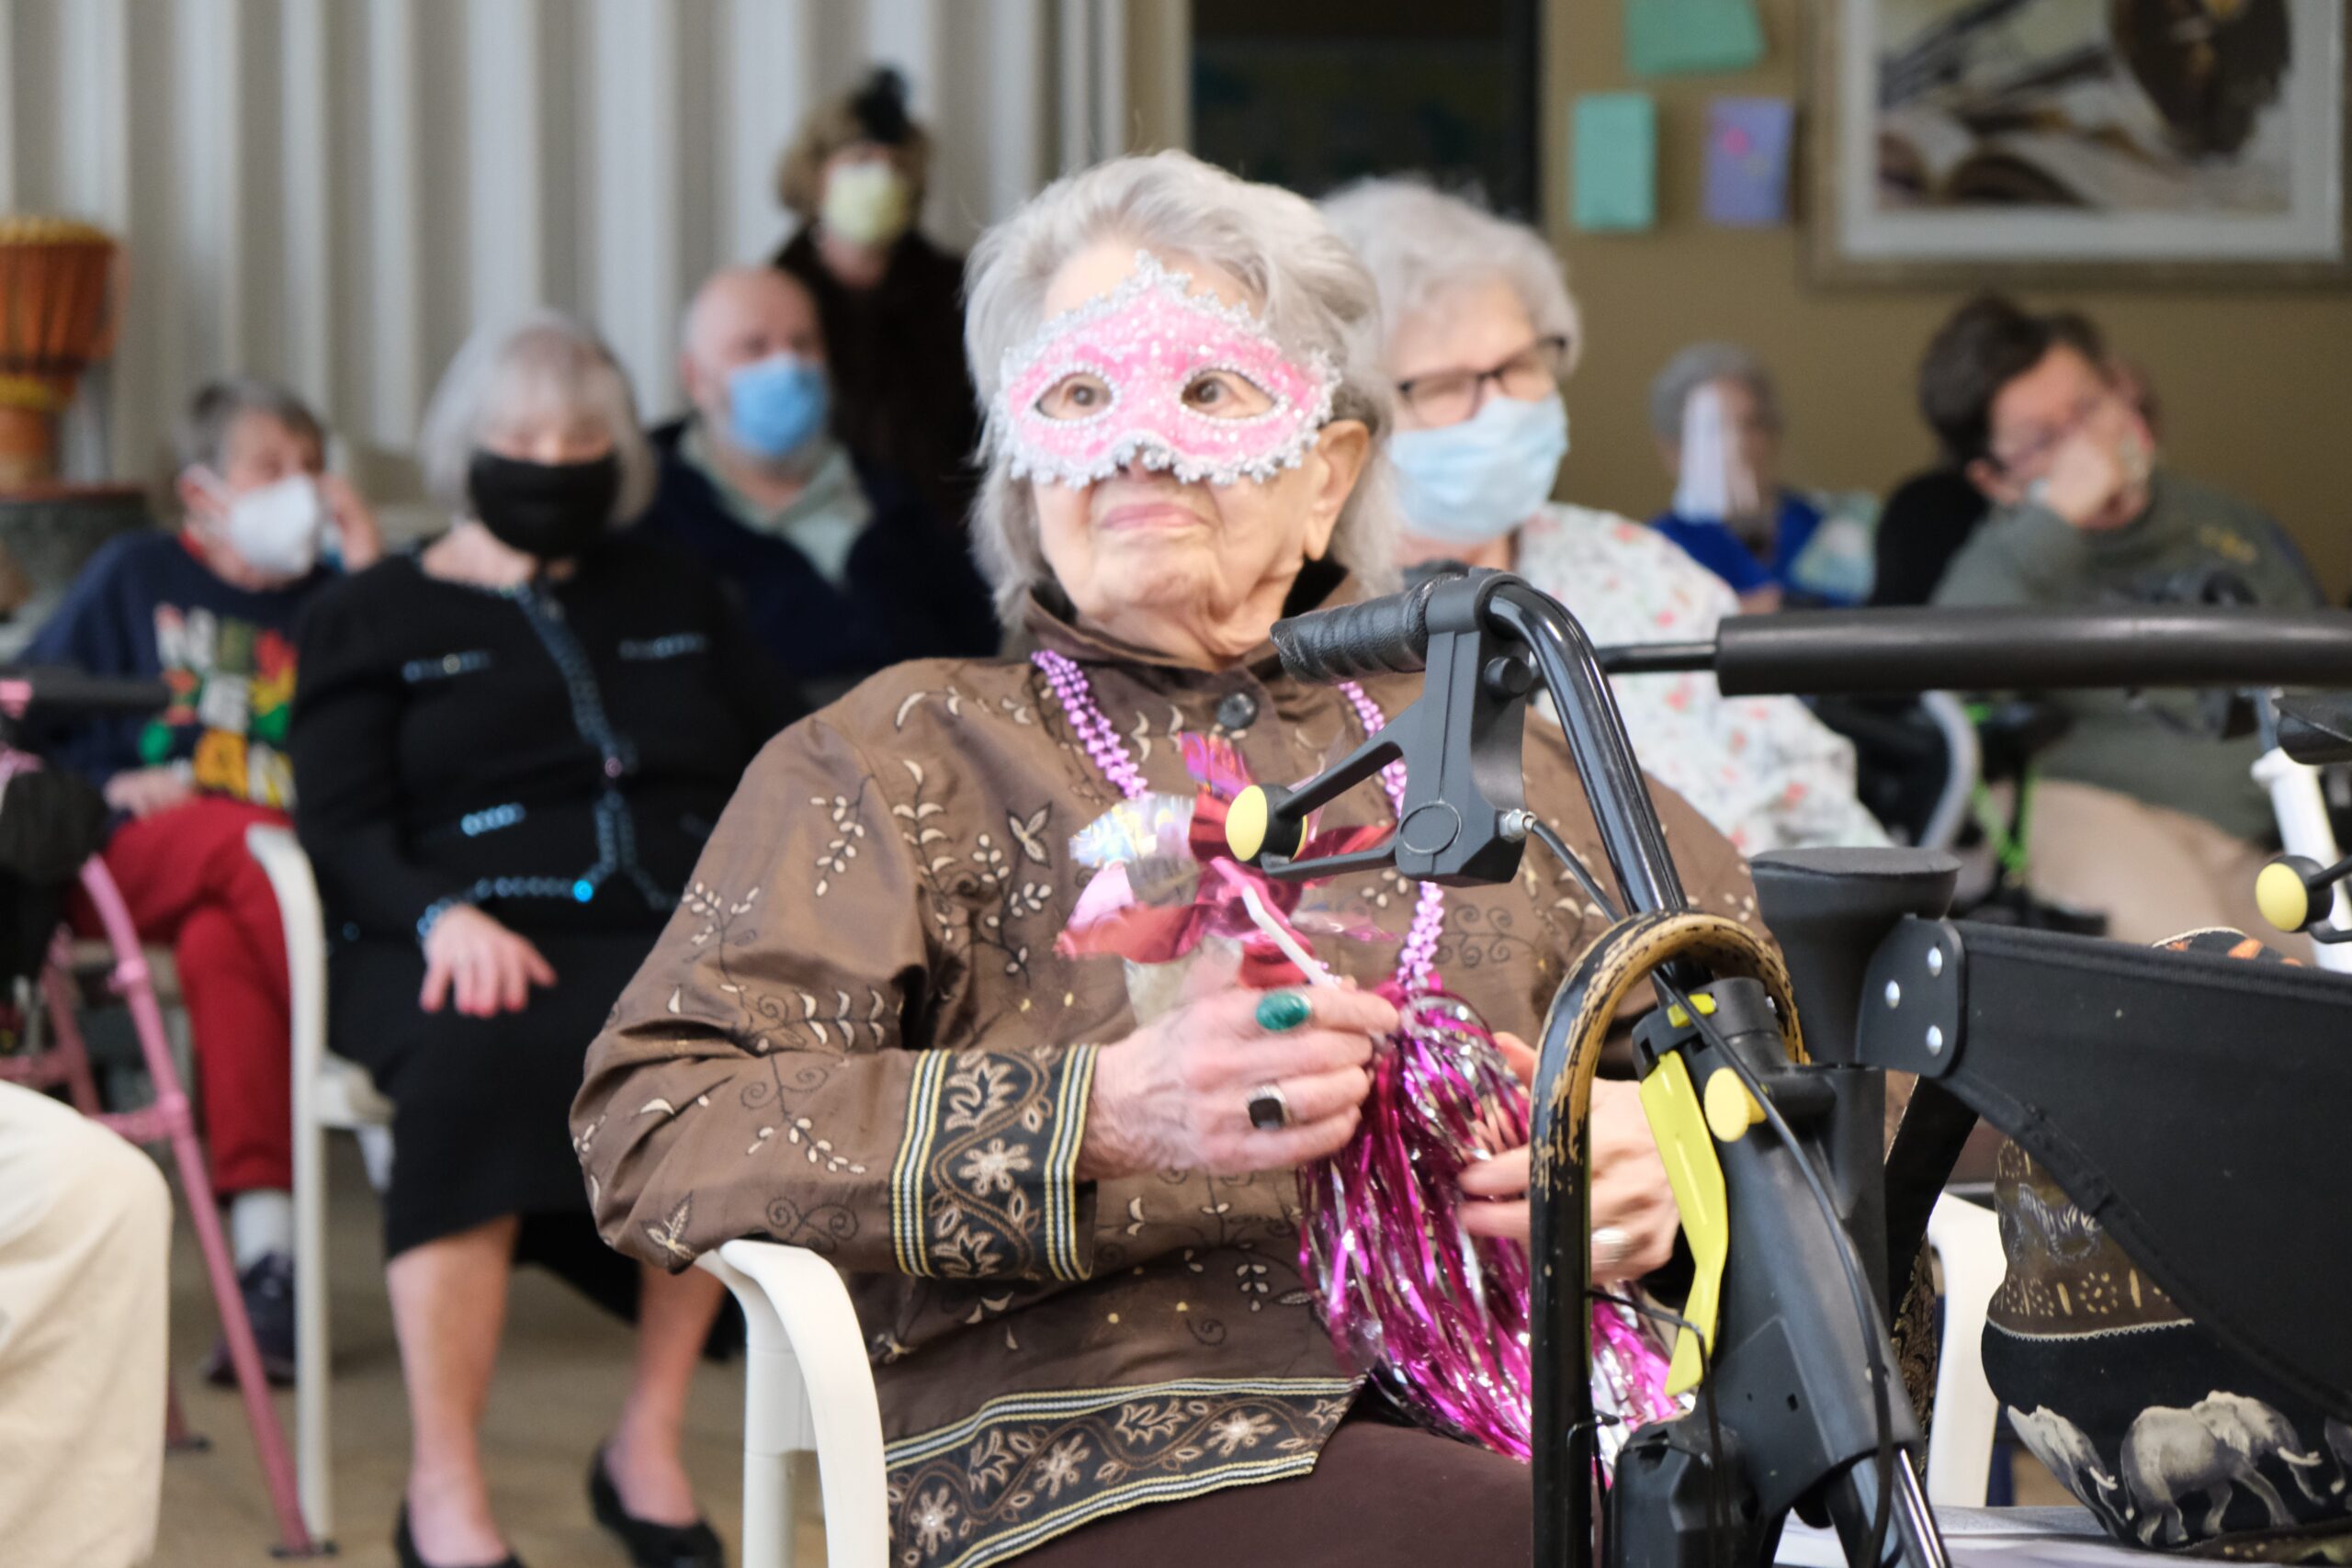 a resident in a masquerade mask surrounded by others for a party